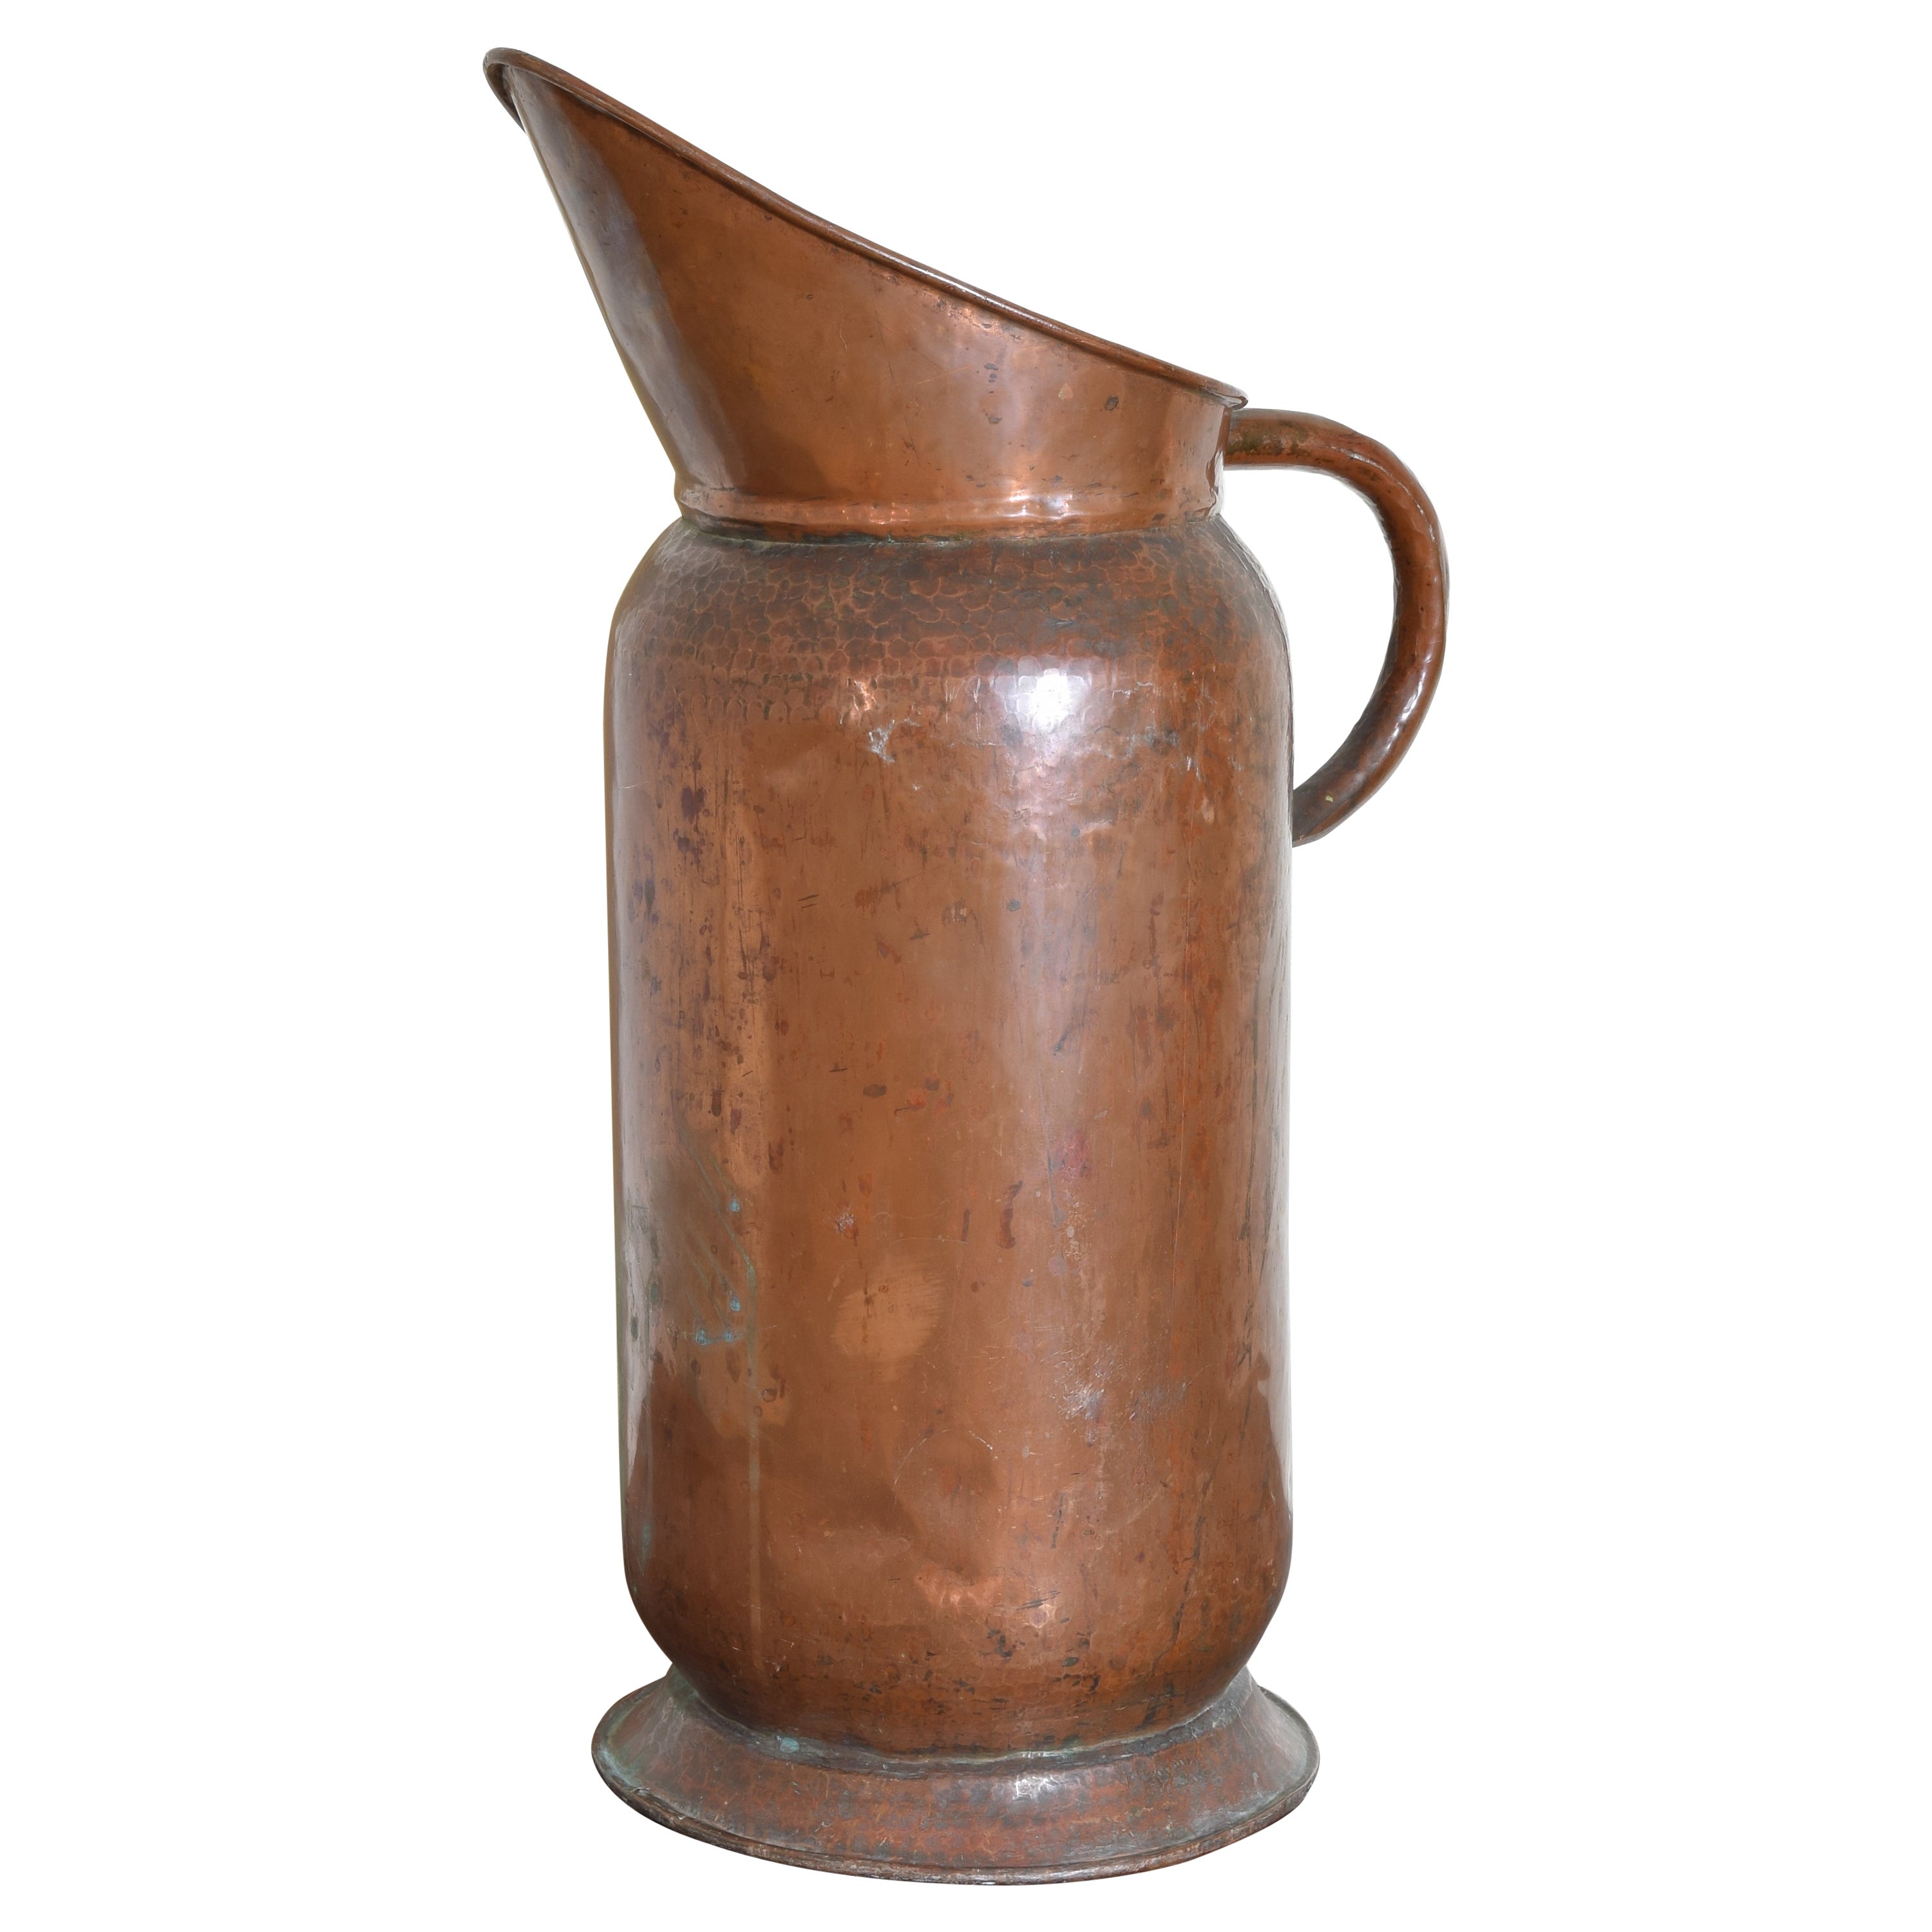 French Copper Water Pitcher from the mid 19th century